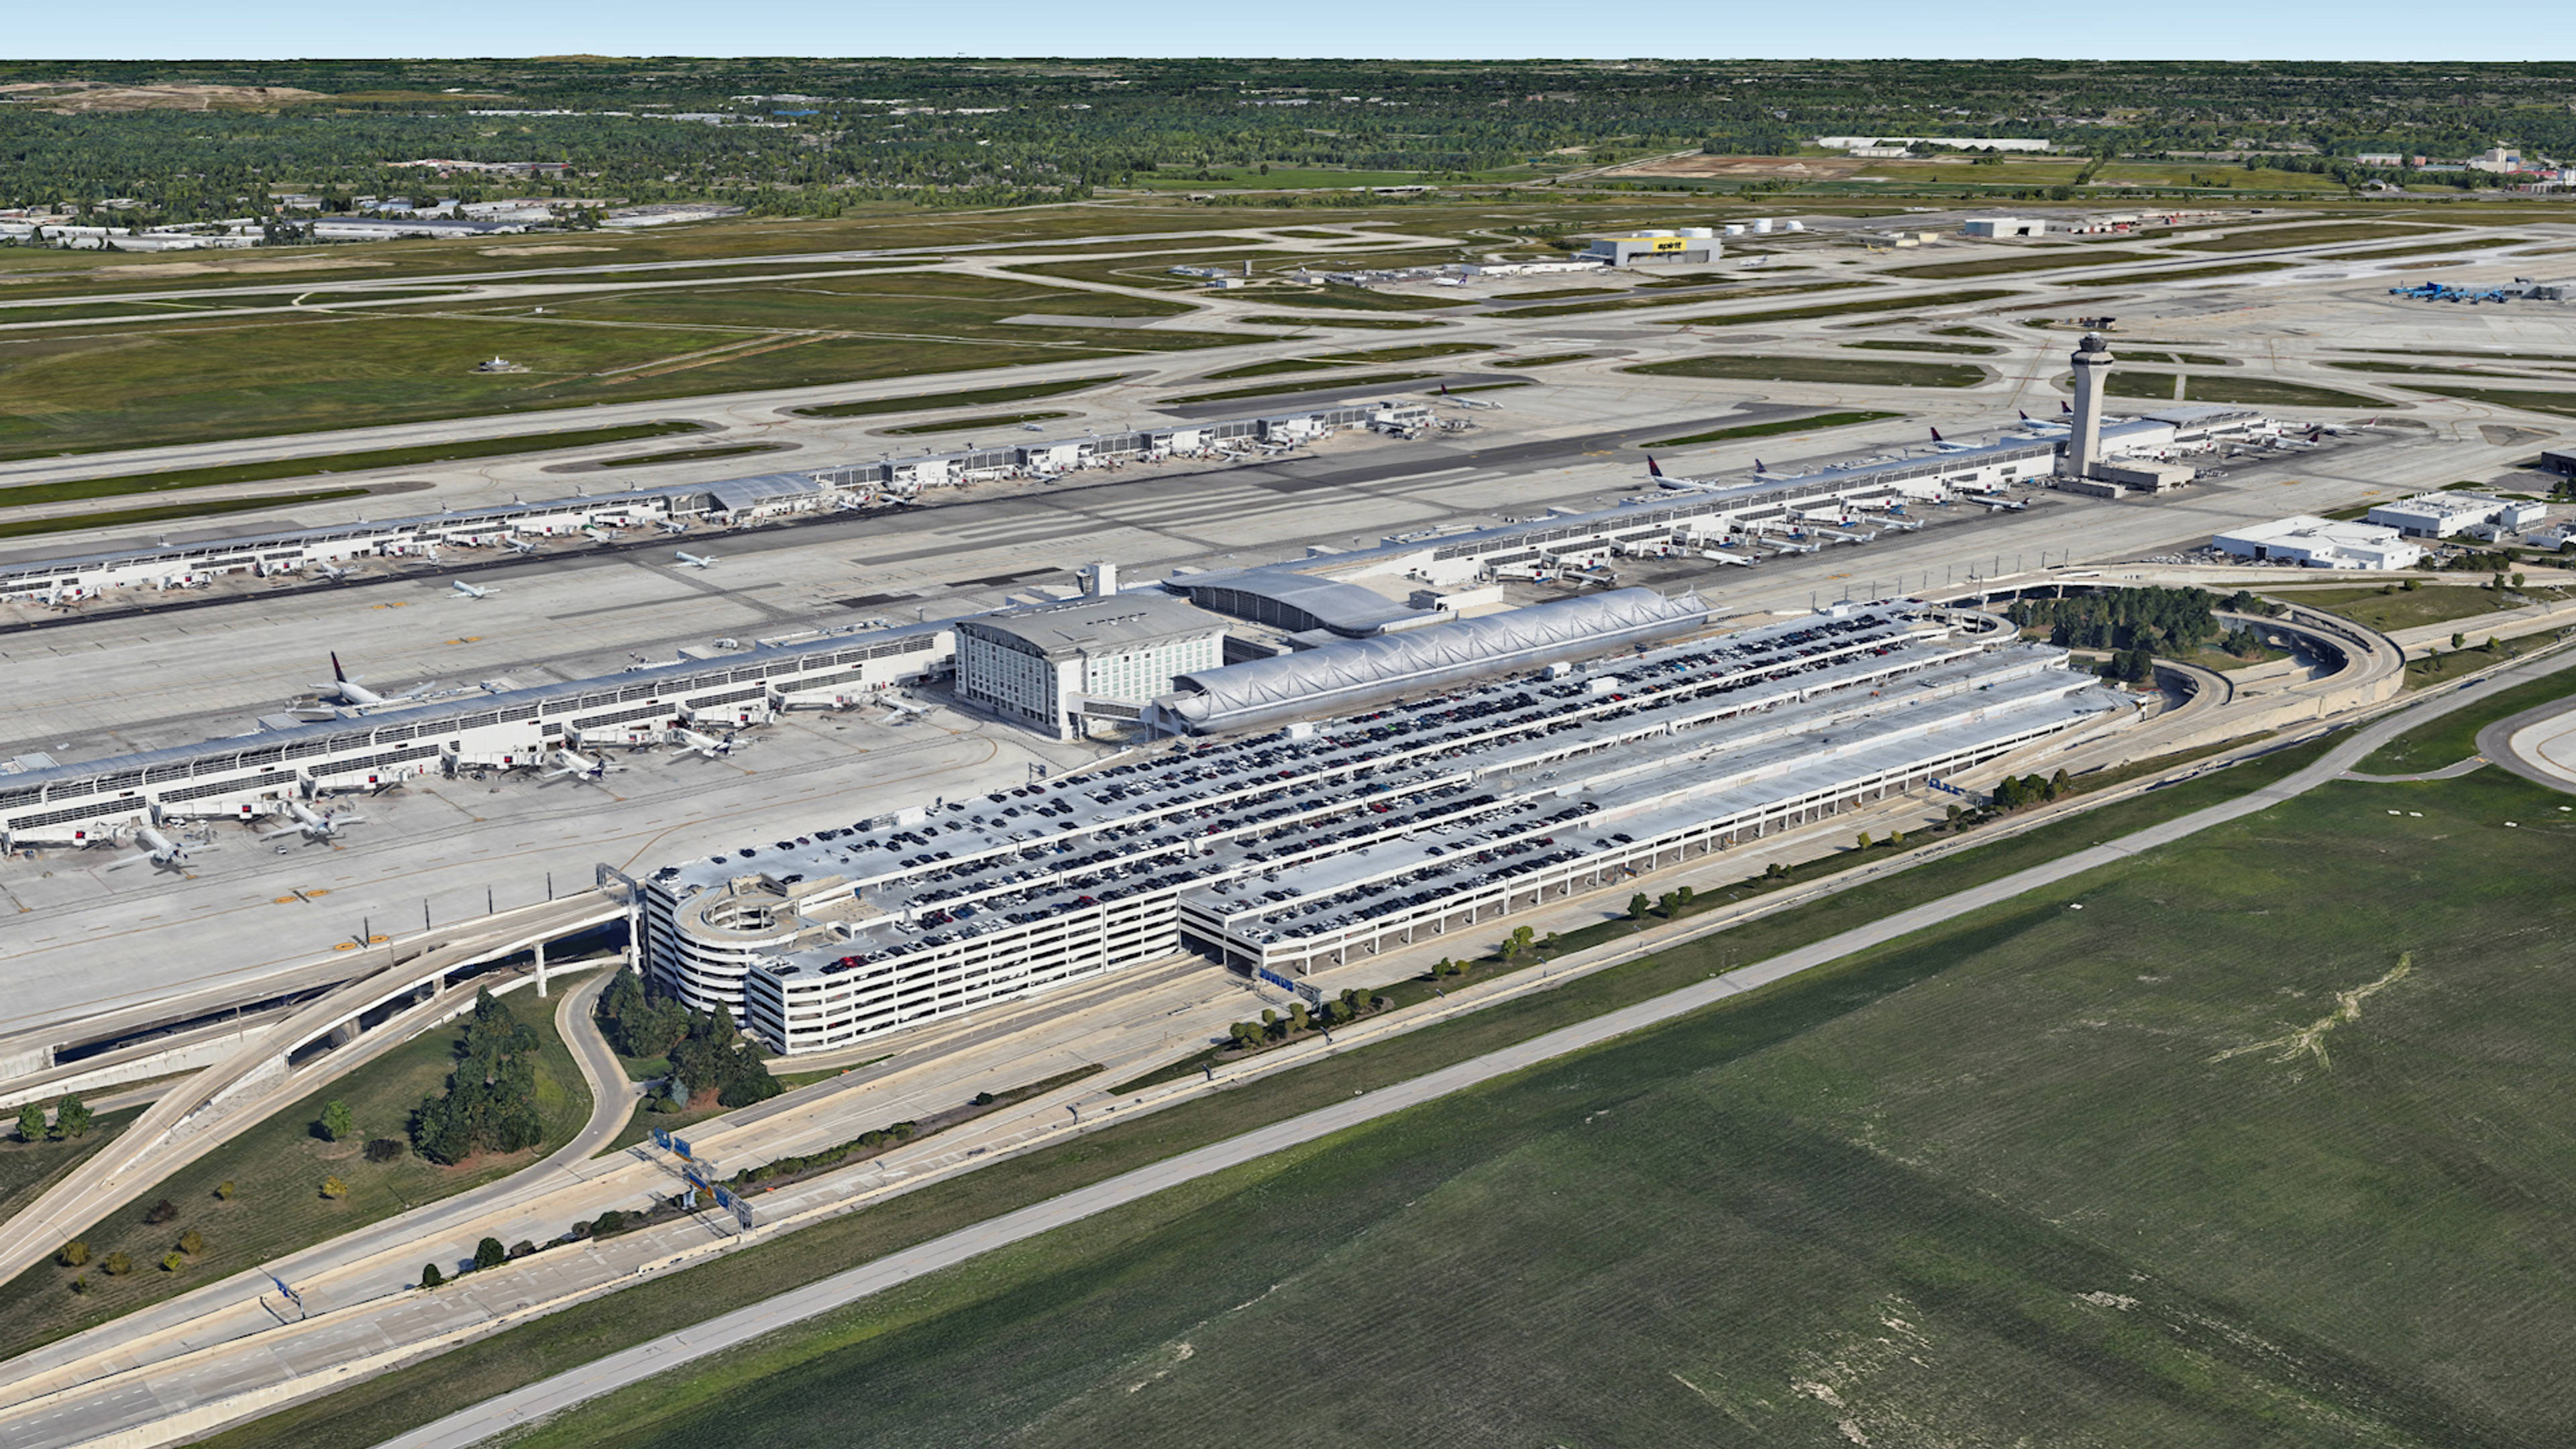  Aerial View of Detroit Airport Parking